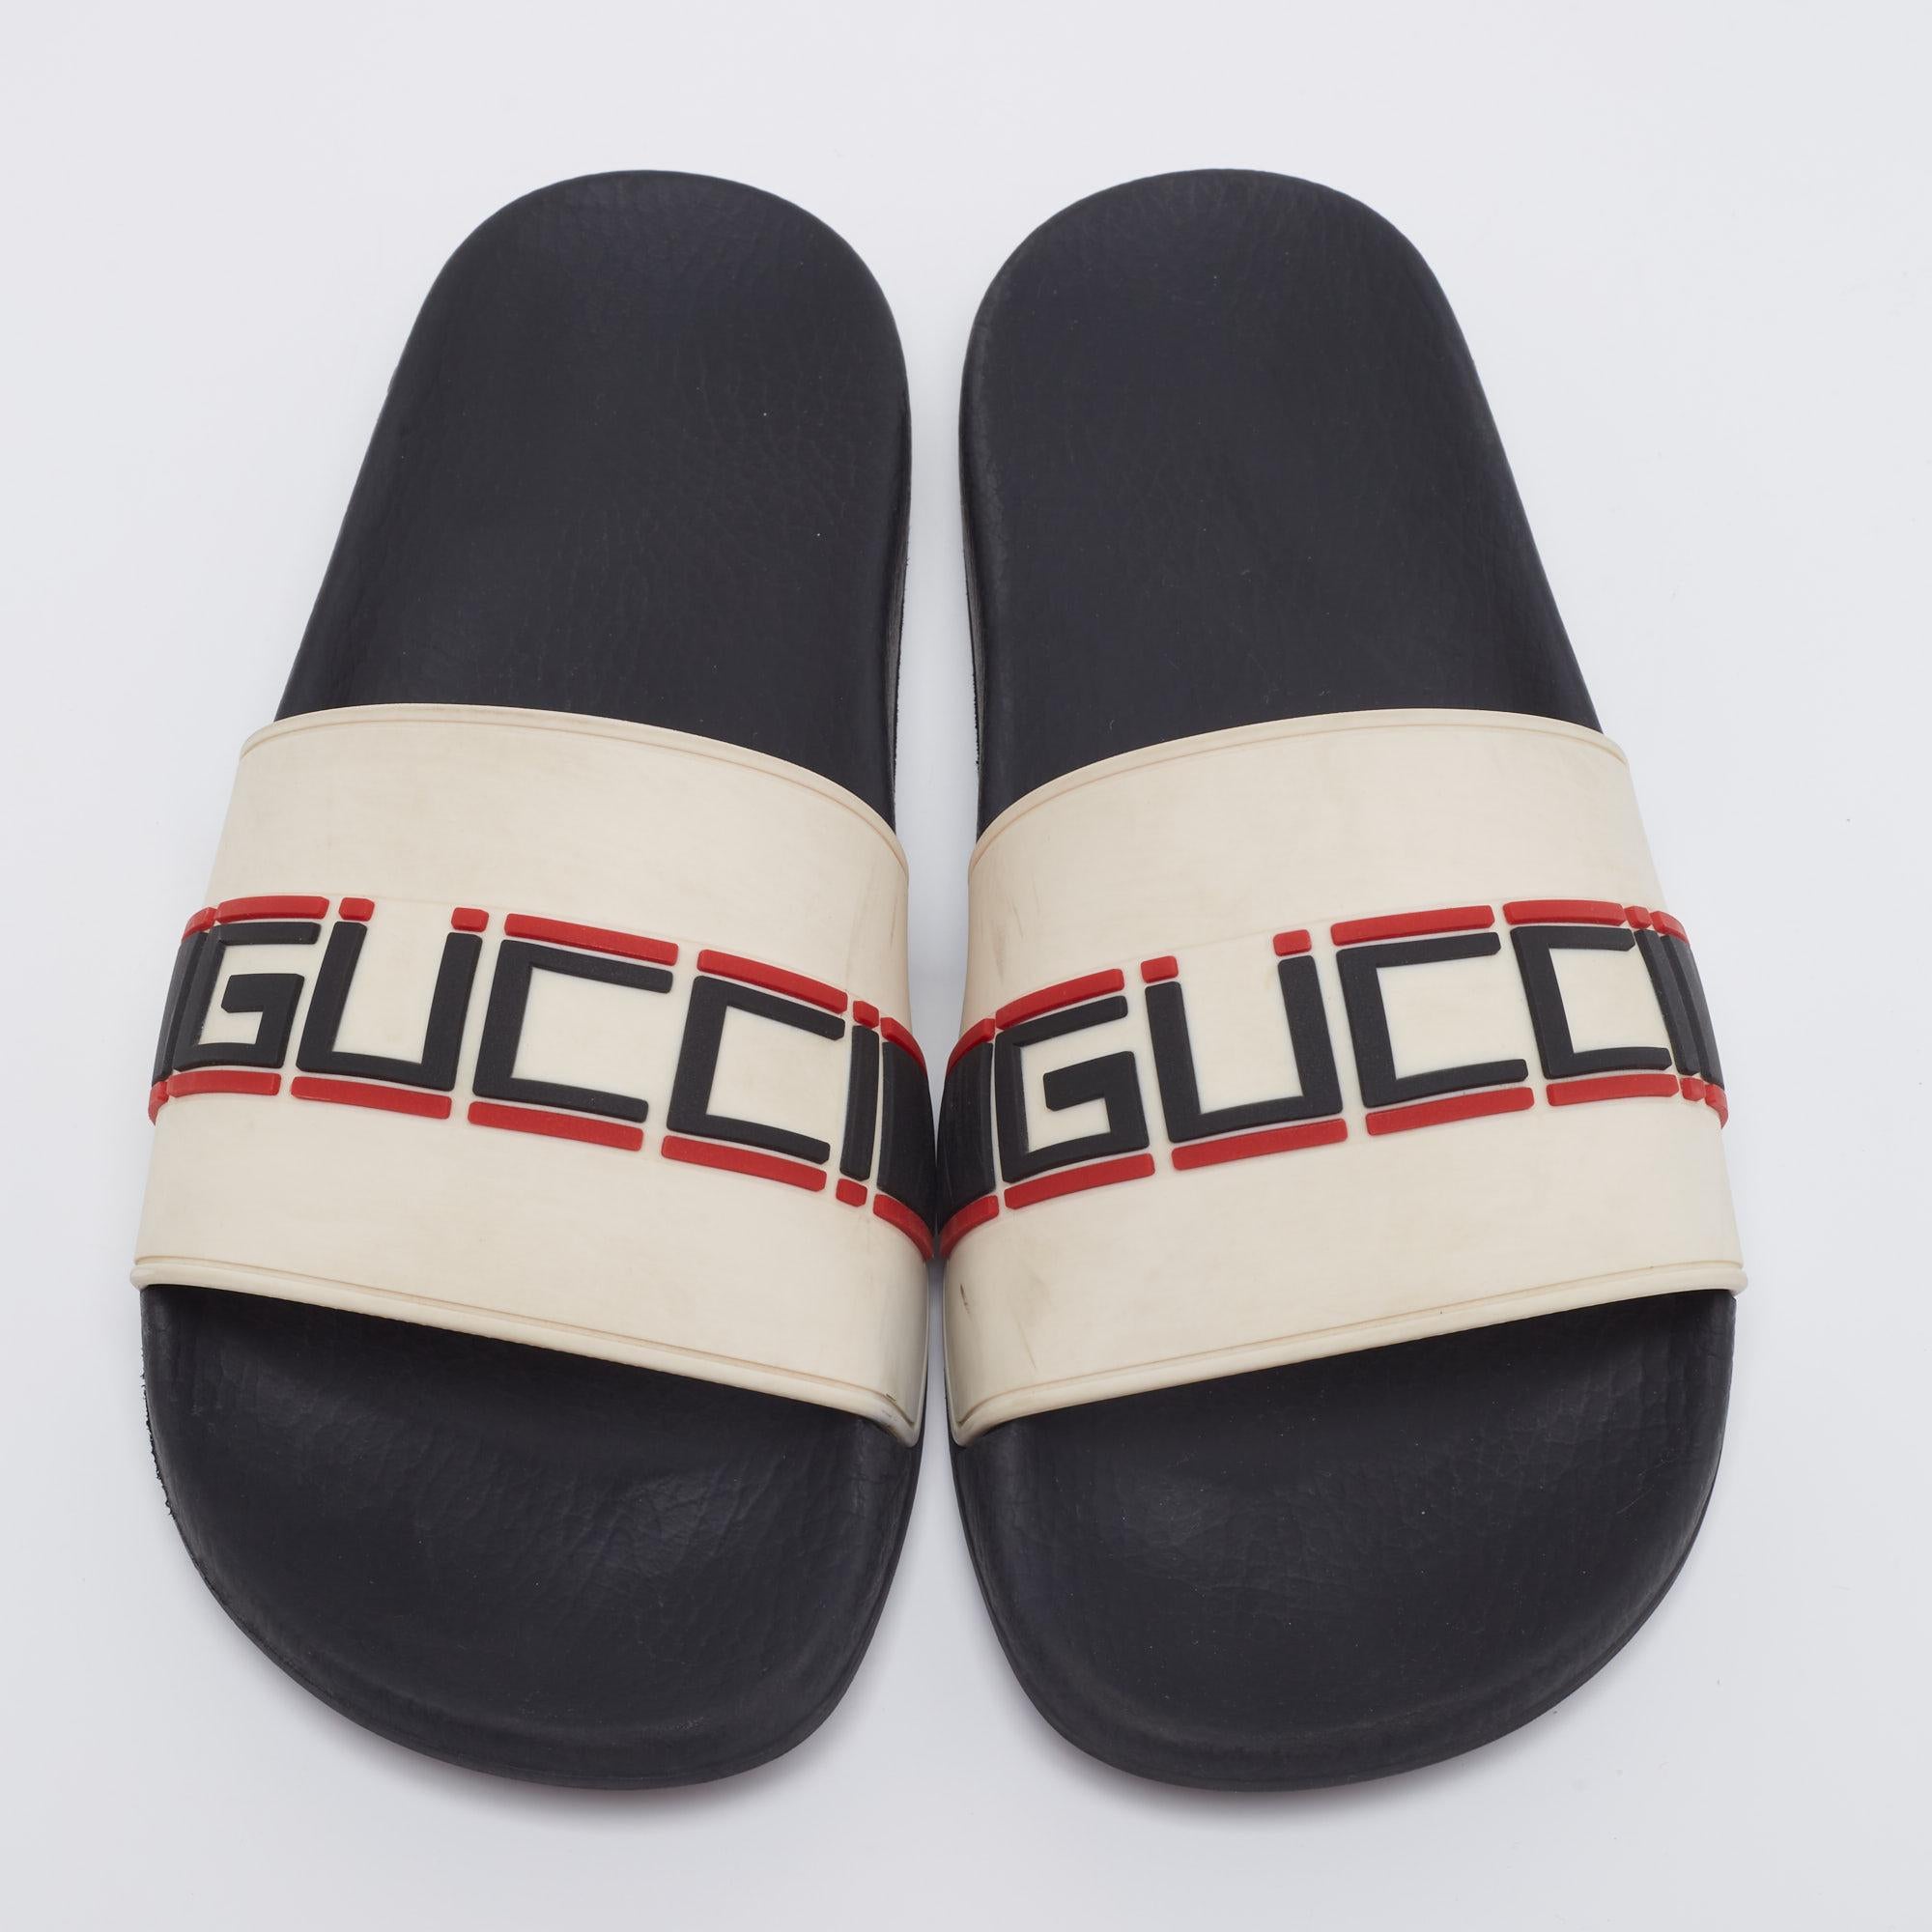 Adorn your feet with these cool and comfortable pool slide sandals from the House of Gucci. They are made from off-white rubber on the upper, which is highlighted by a logo print. They are made in a slip-on style and are perfect for casual